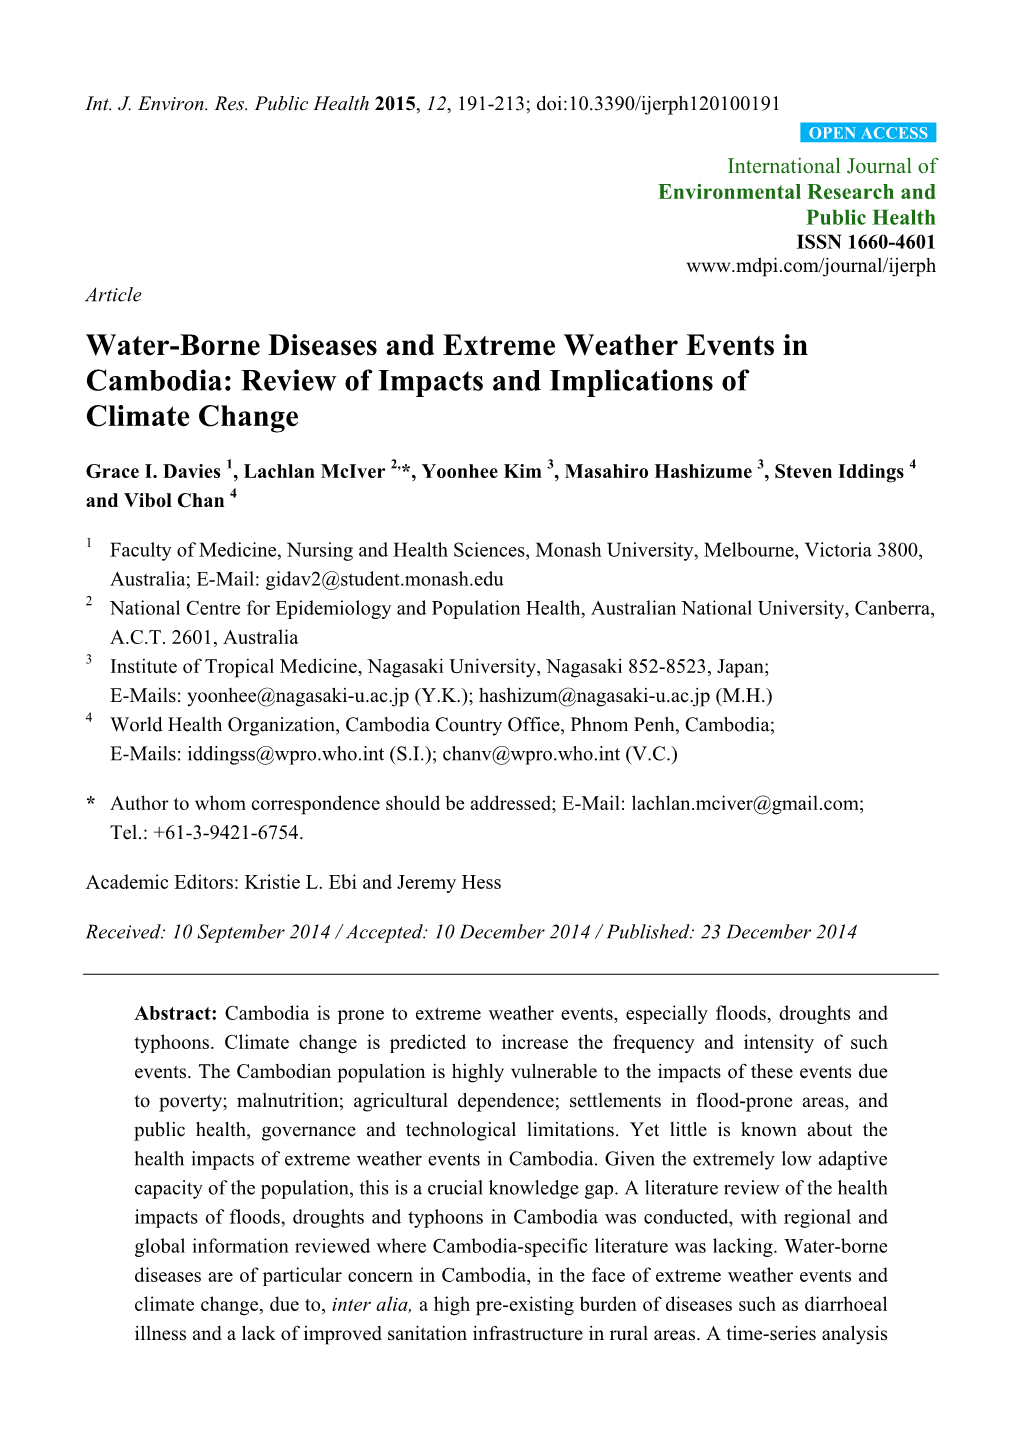 Water-Borne Diseases and Extreme Weather Events in Cambodia: Review of Impacts and Implications of Climate Change